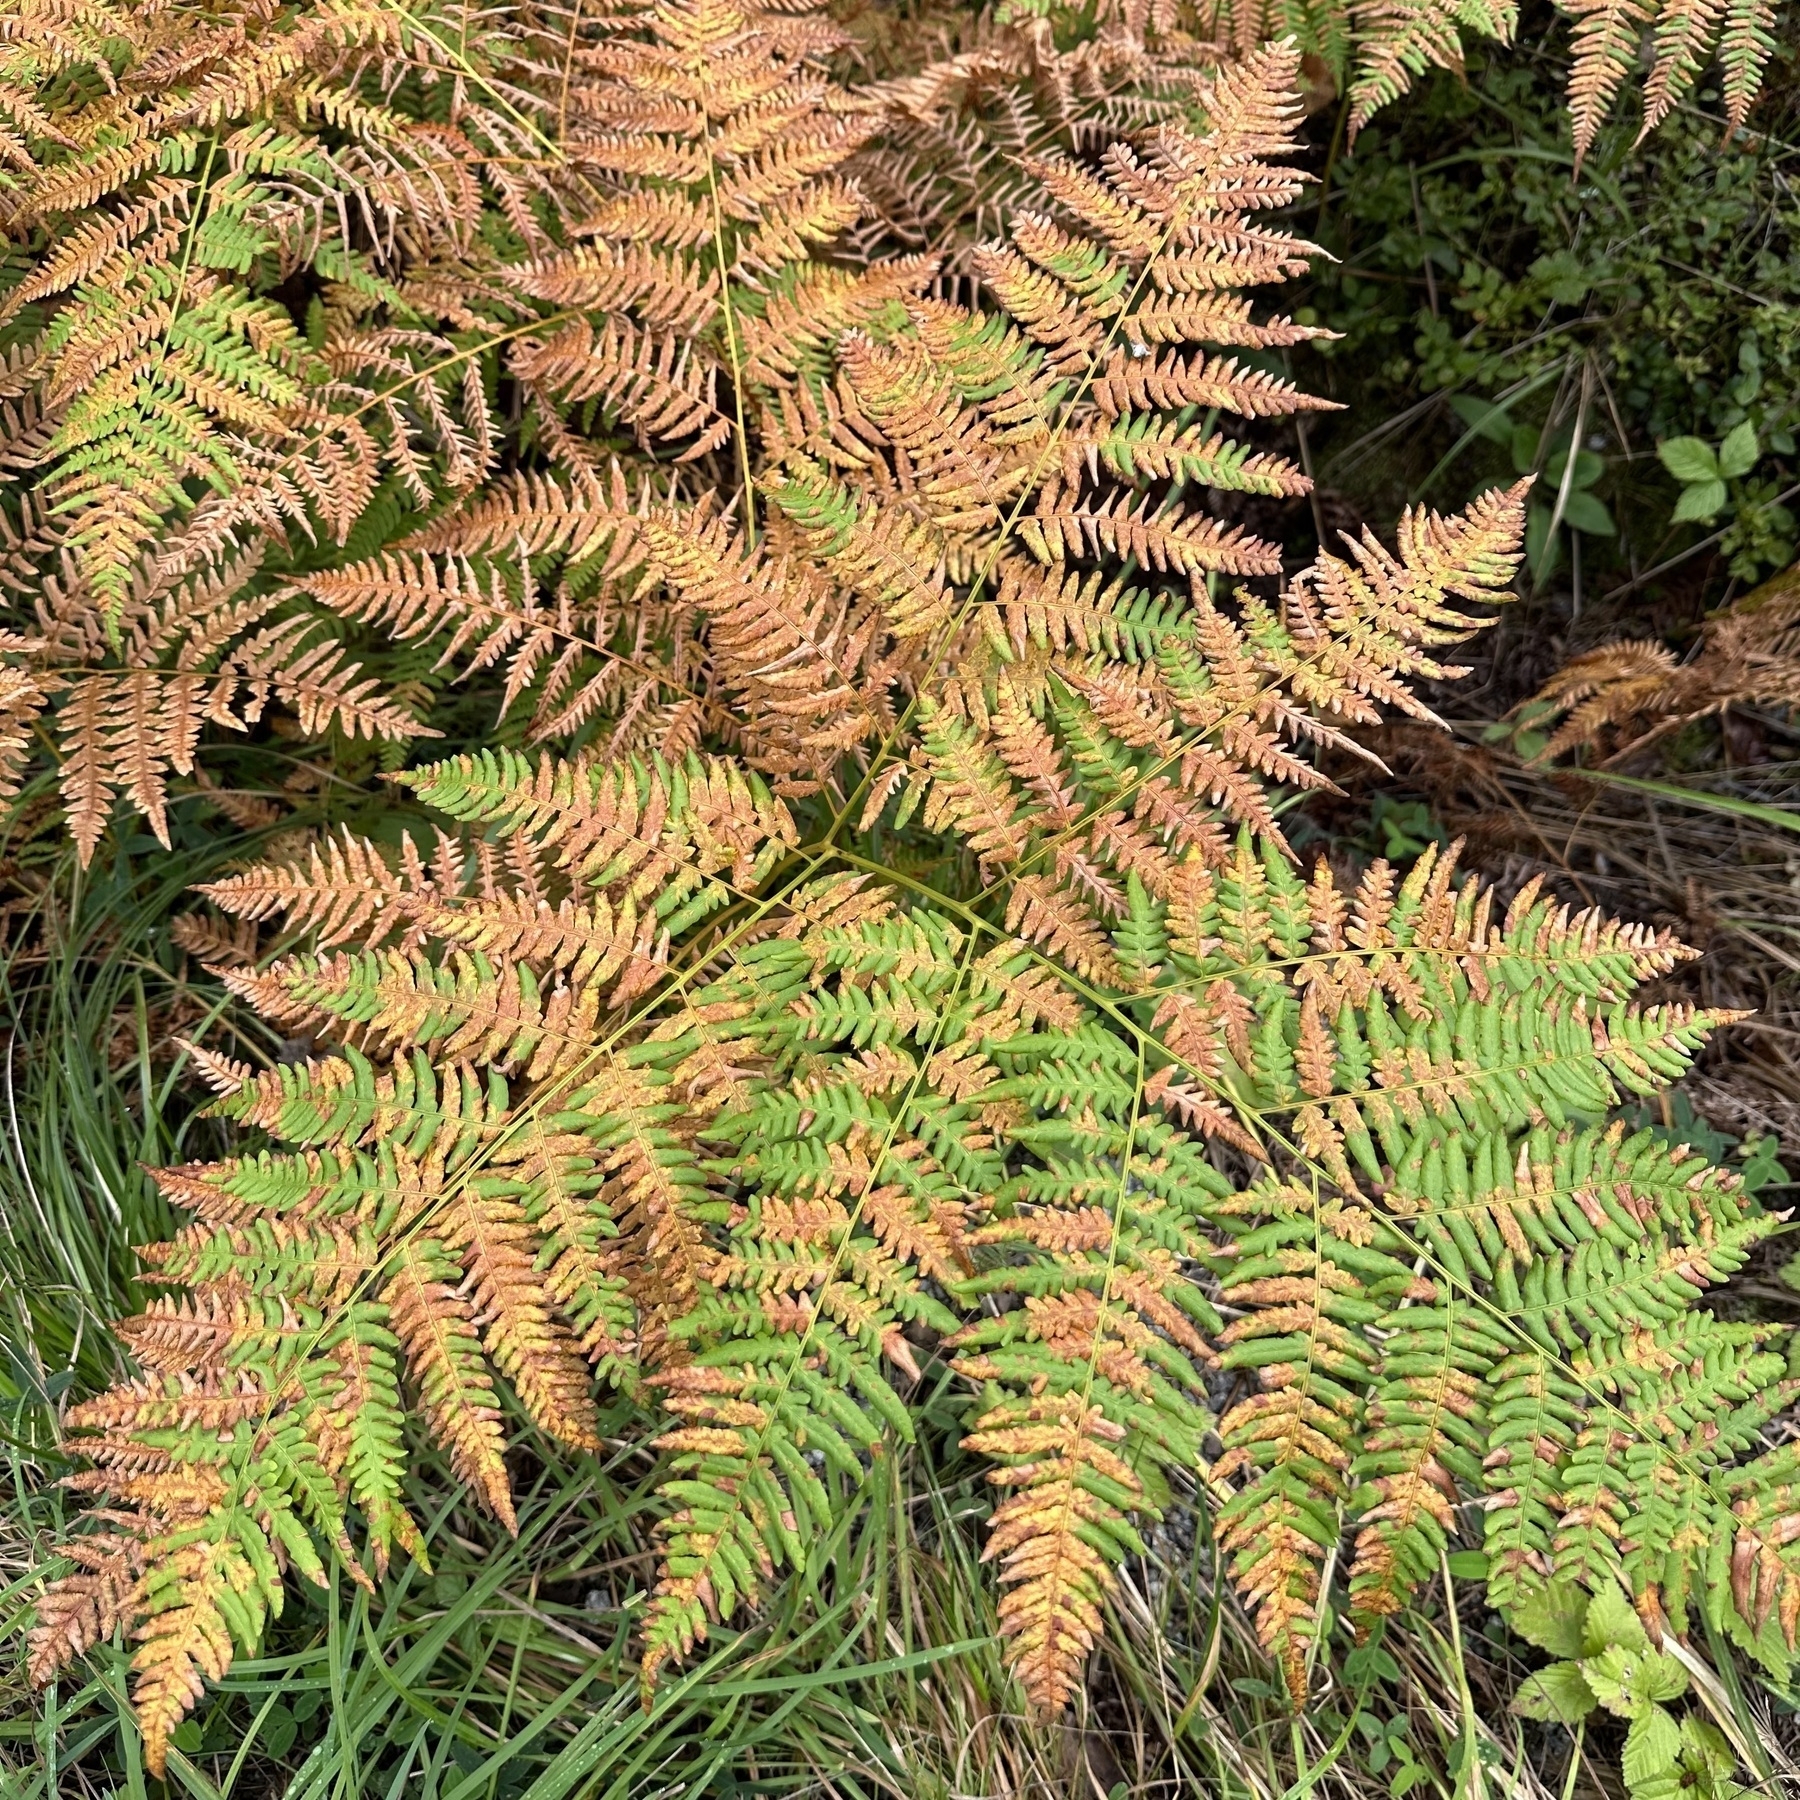 A fern with some leaves green and some brown.